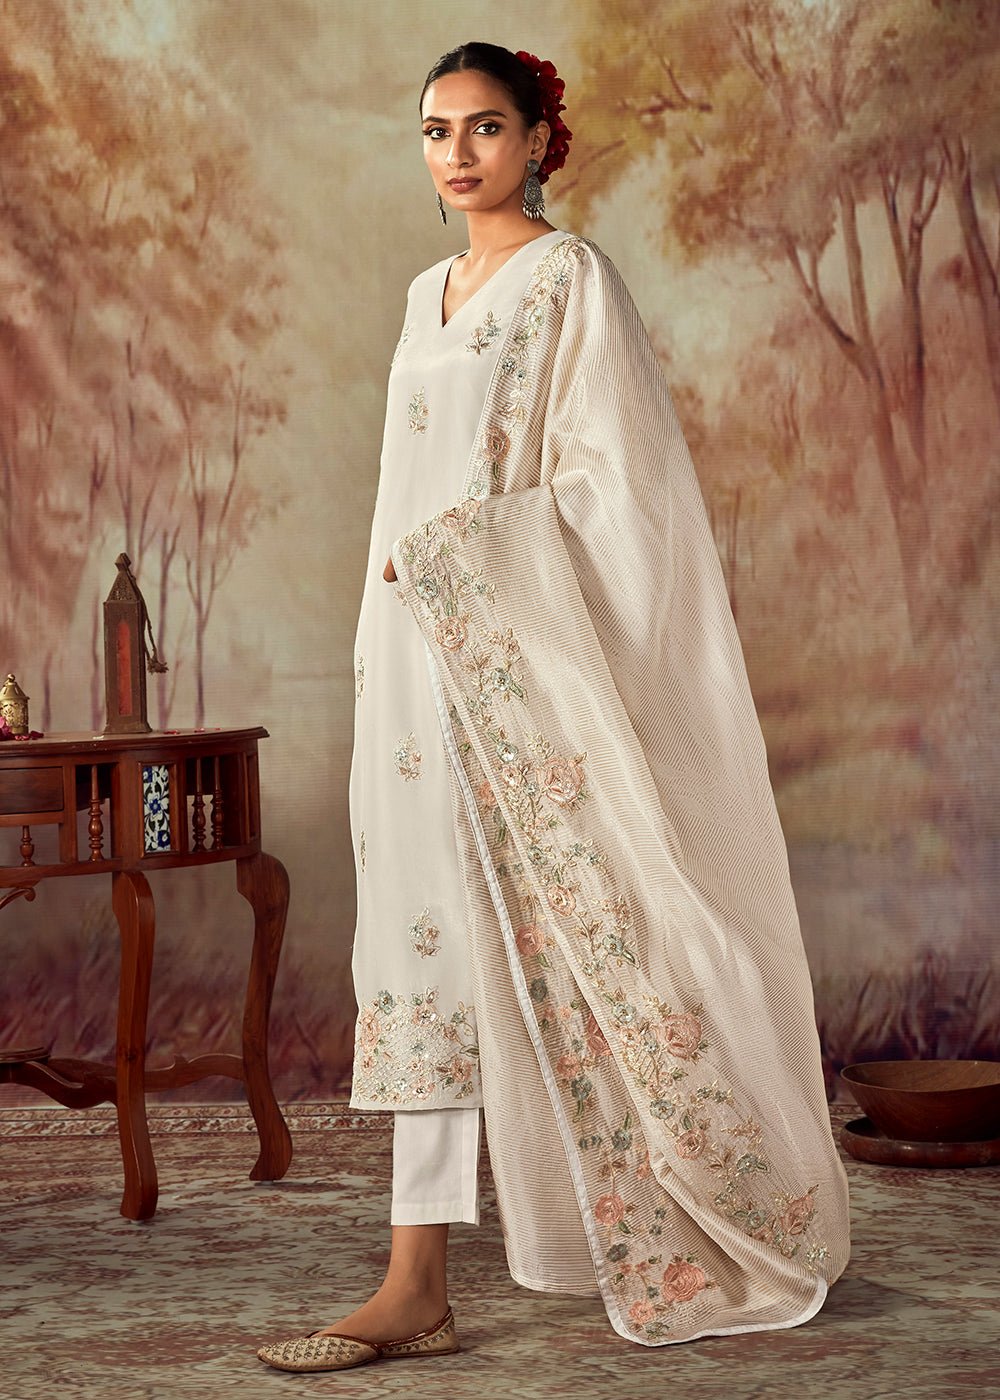 Buy Now Pearl White Russian Silk Embroidered Pant Style Salwar Kurta Online in USA, UK, Canada, Germany, Australia & Worldwide at Empress Clothing.